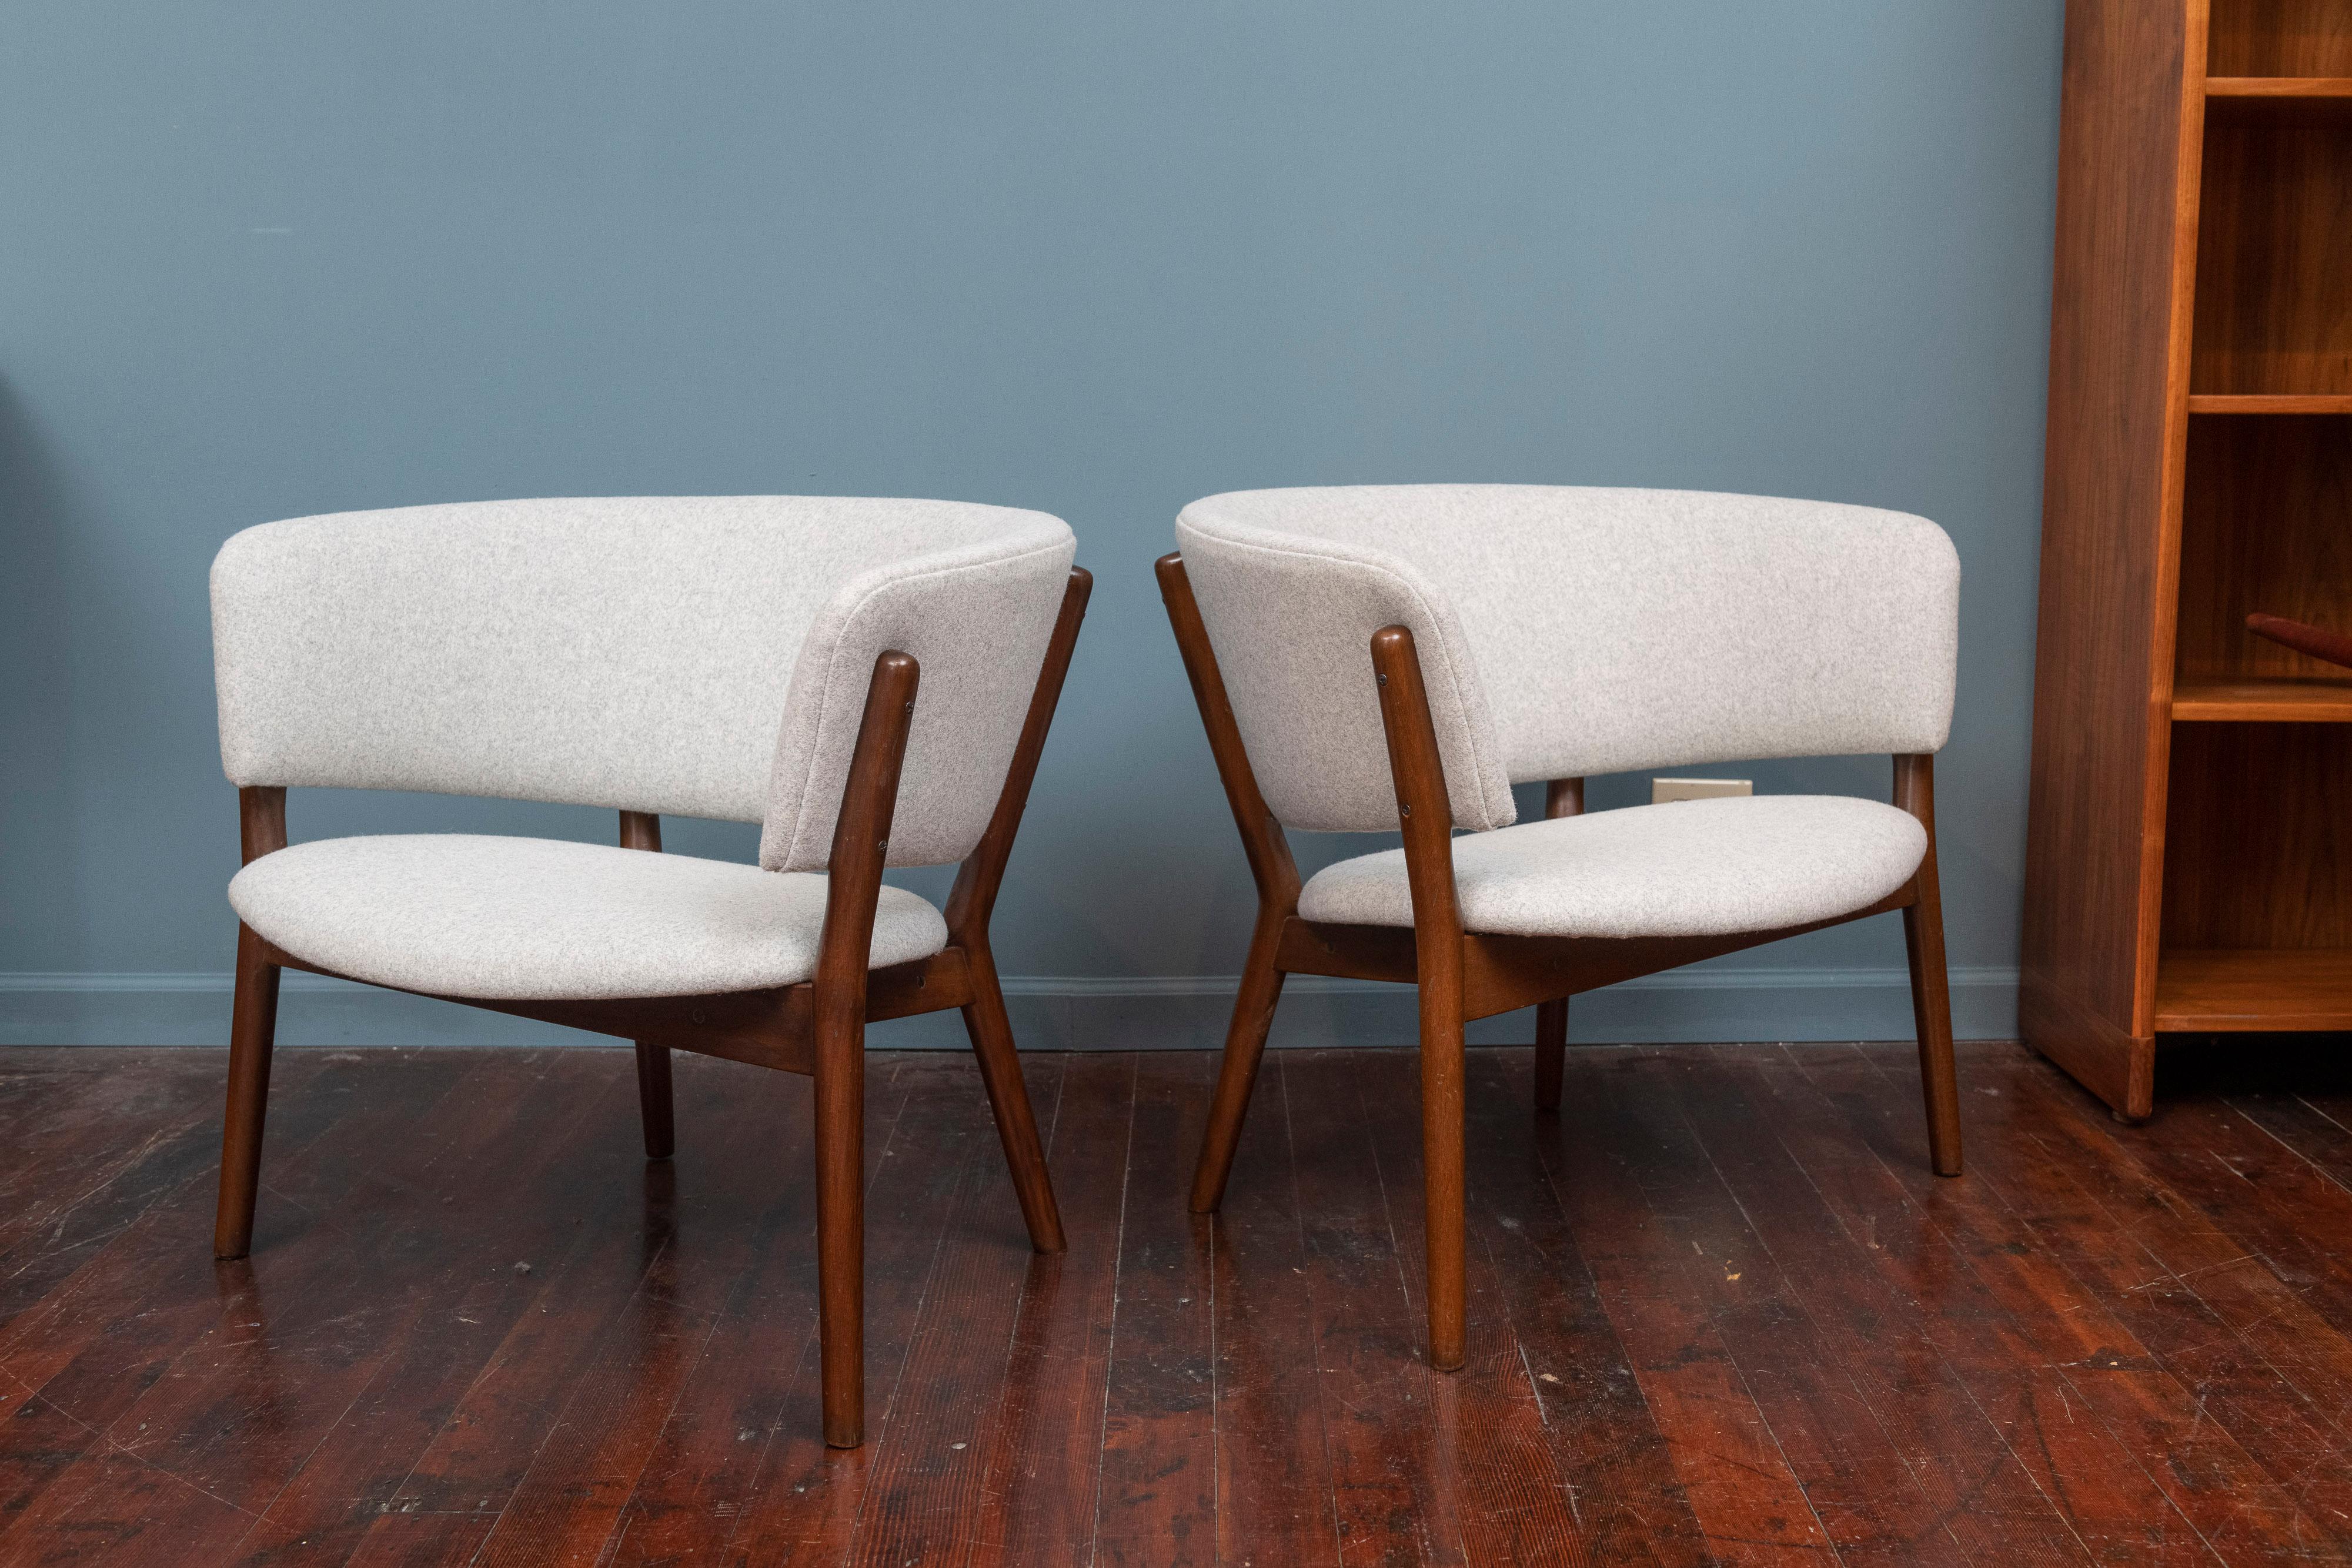 Pair of Nanna Ditzel design lounge chairs, newly upholstered in a light grey wool with refinished frames.